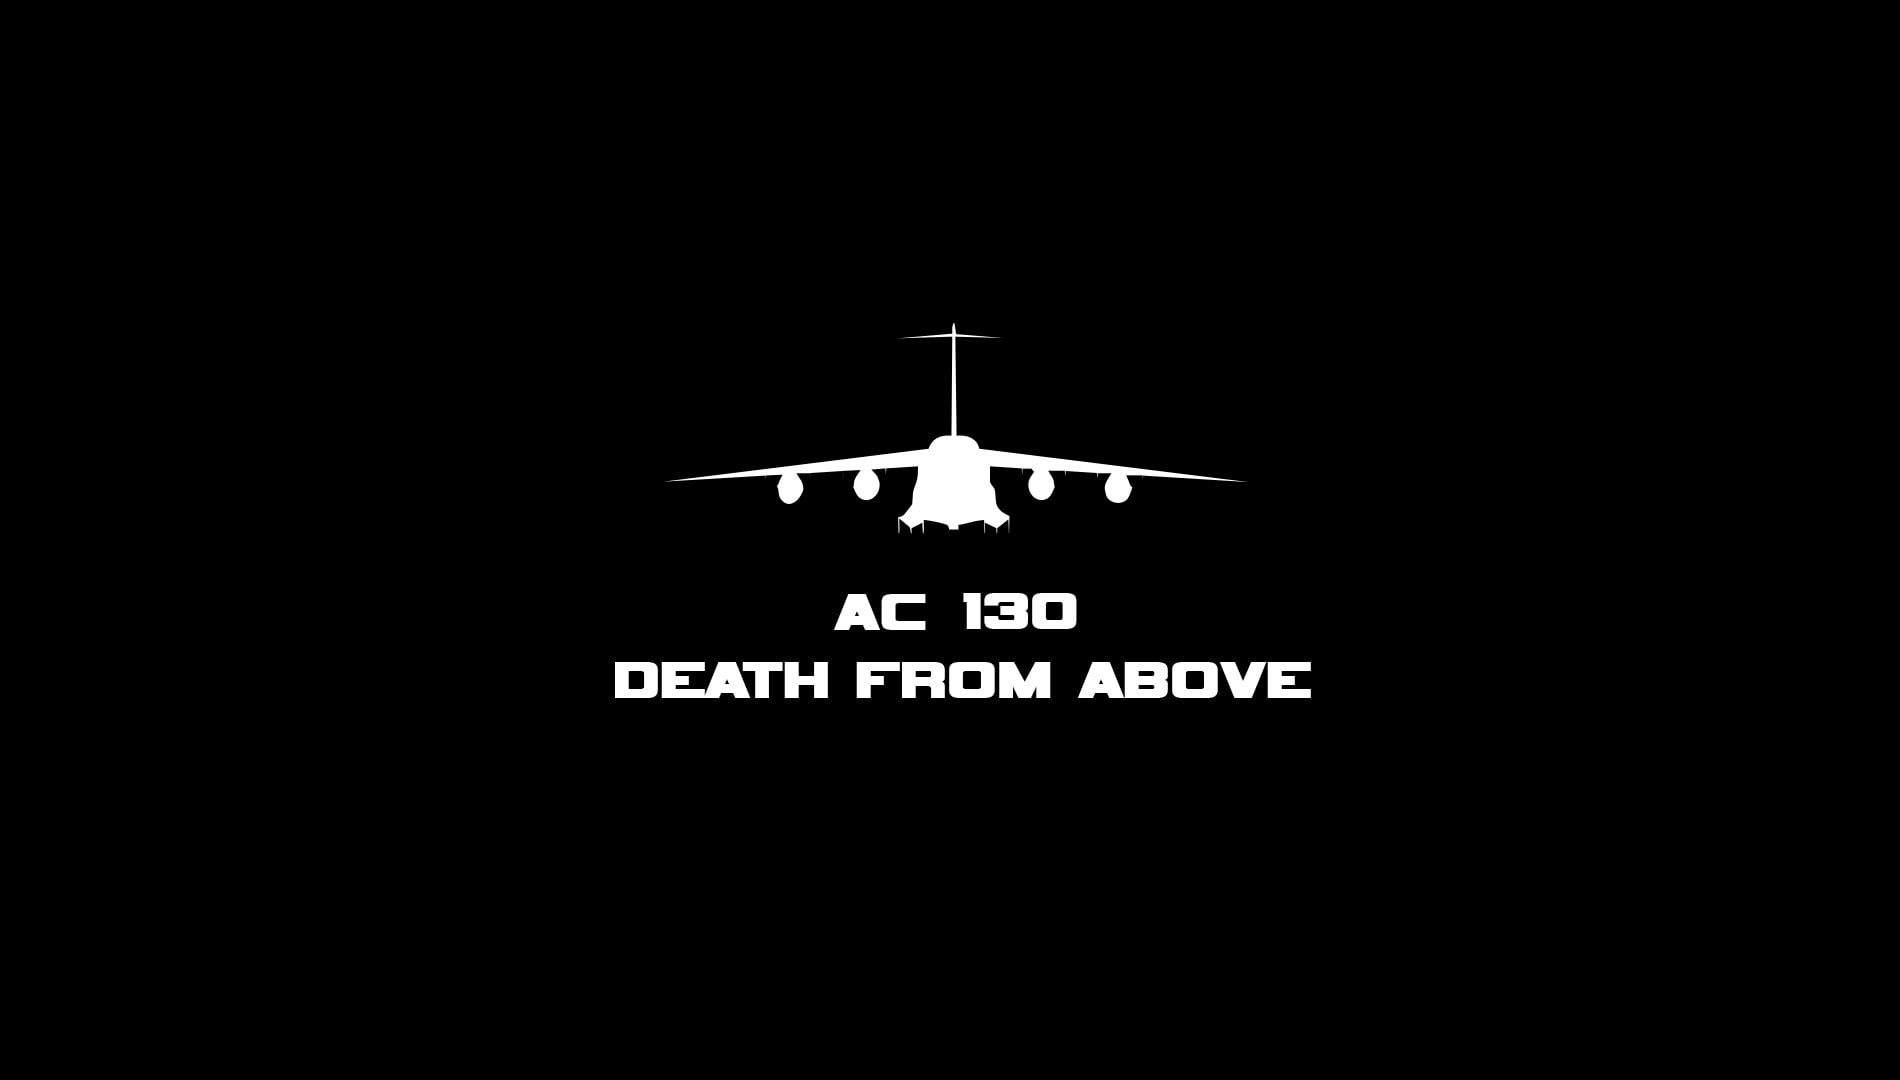 AC 130 Death From Above illustration, Boeing C-17 Globemaster III, military aircraft, simple background